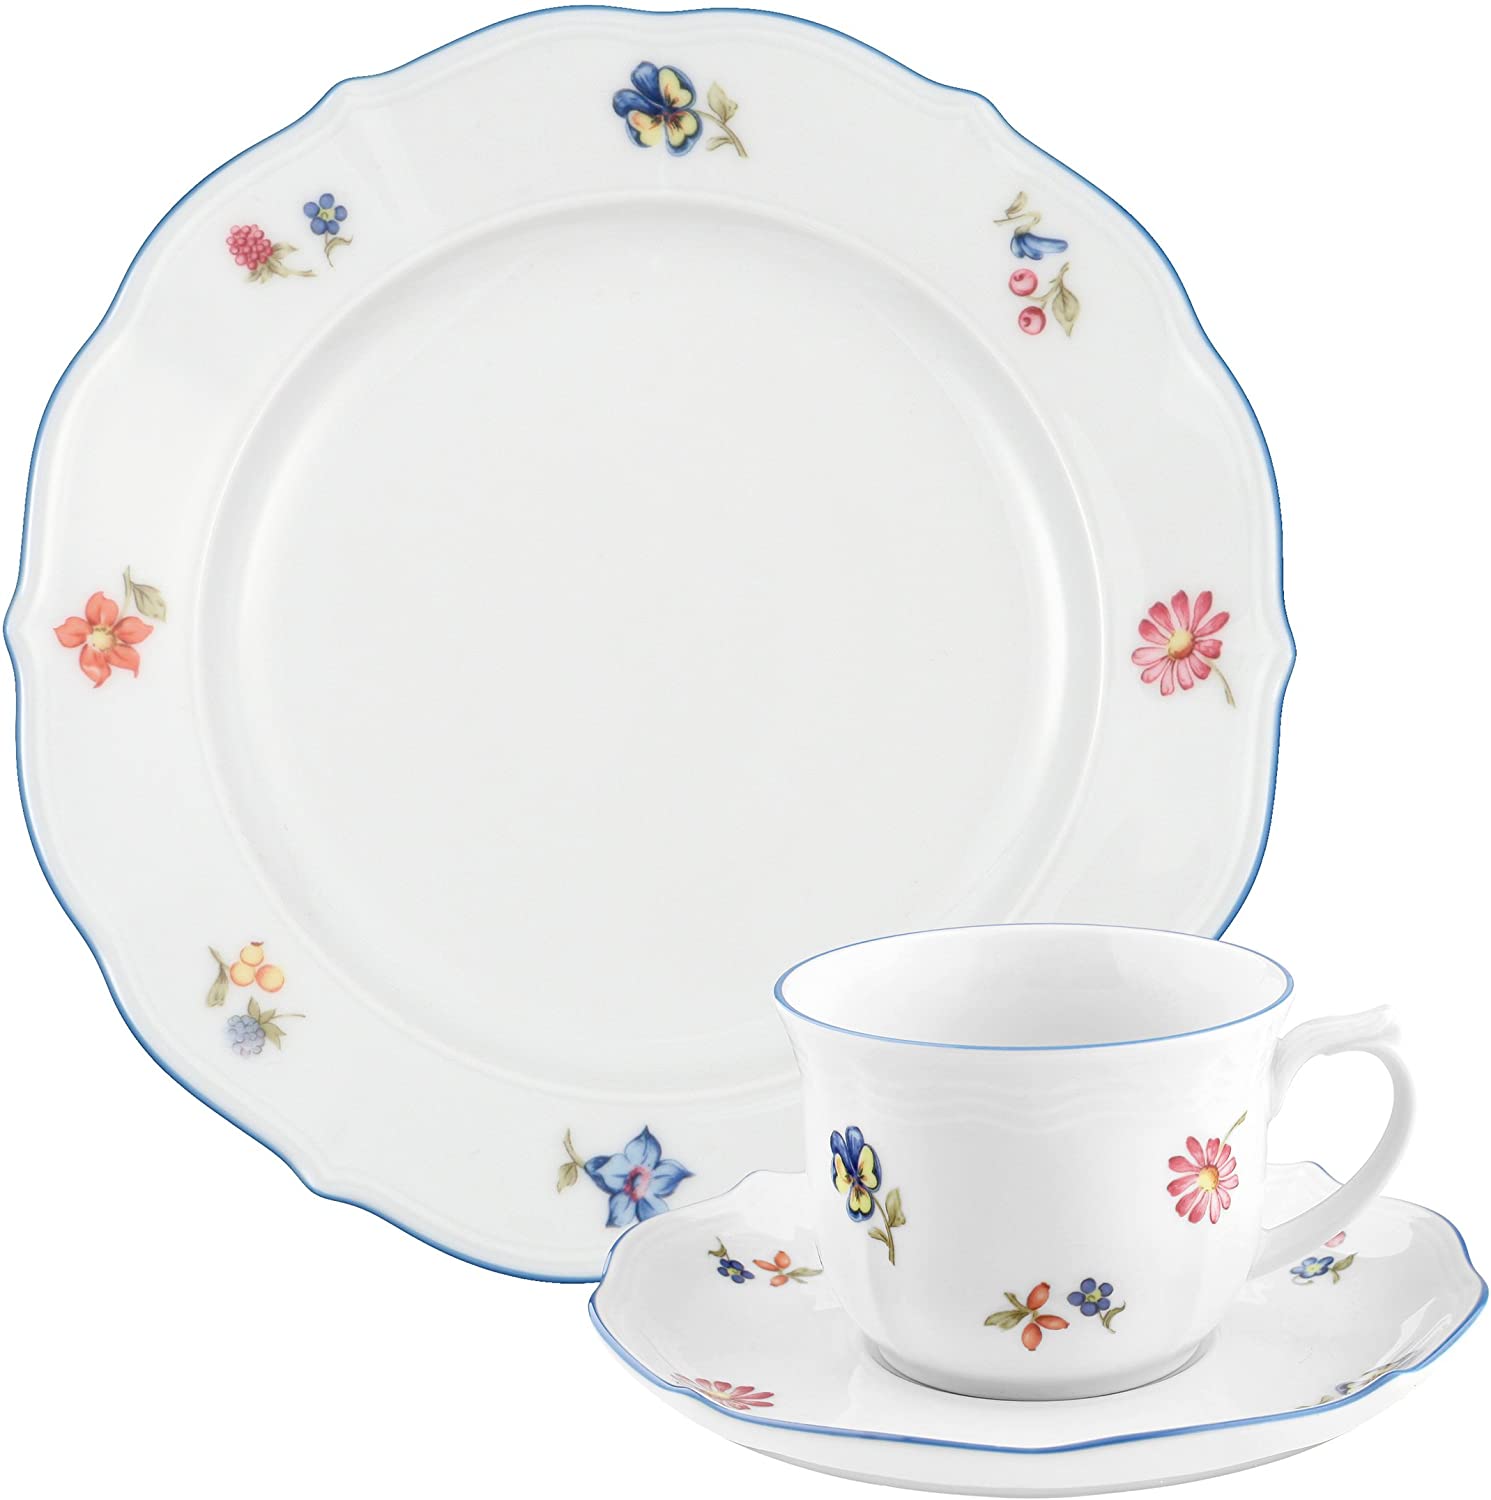 Seltmann Weiden Sonate 001.718662 Coffee Service Set 18 Pieces with Scattered Flowers Pattern